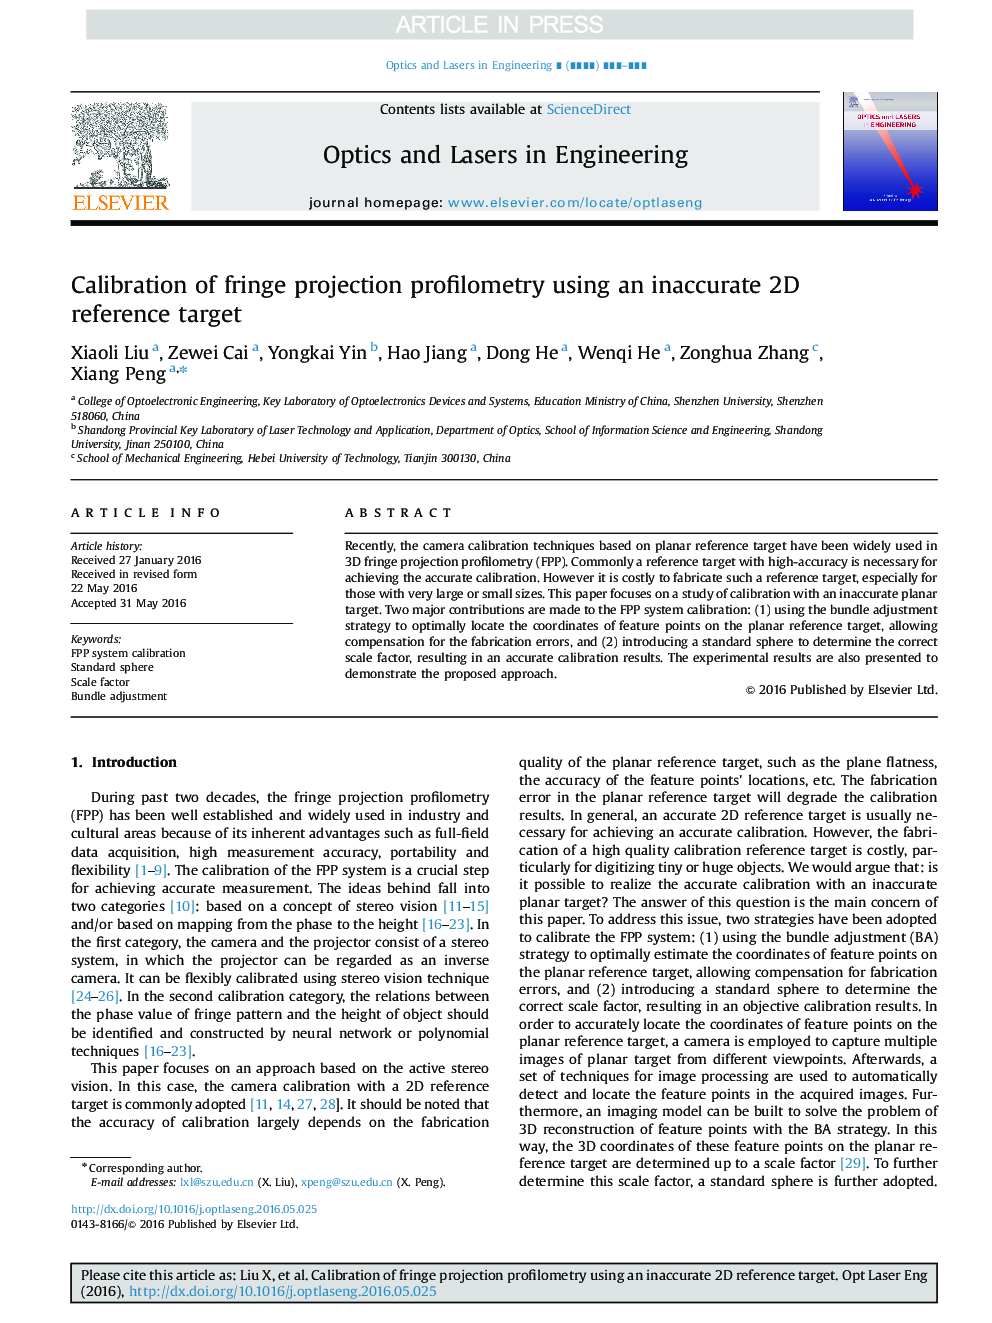 Calibration of fringe projection profilometry using an inaccurate 2D reference target